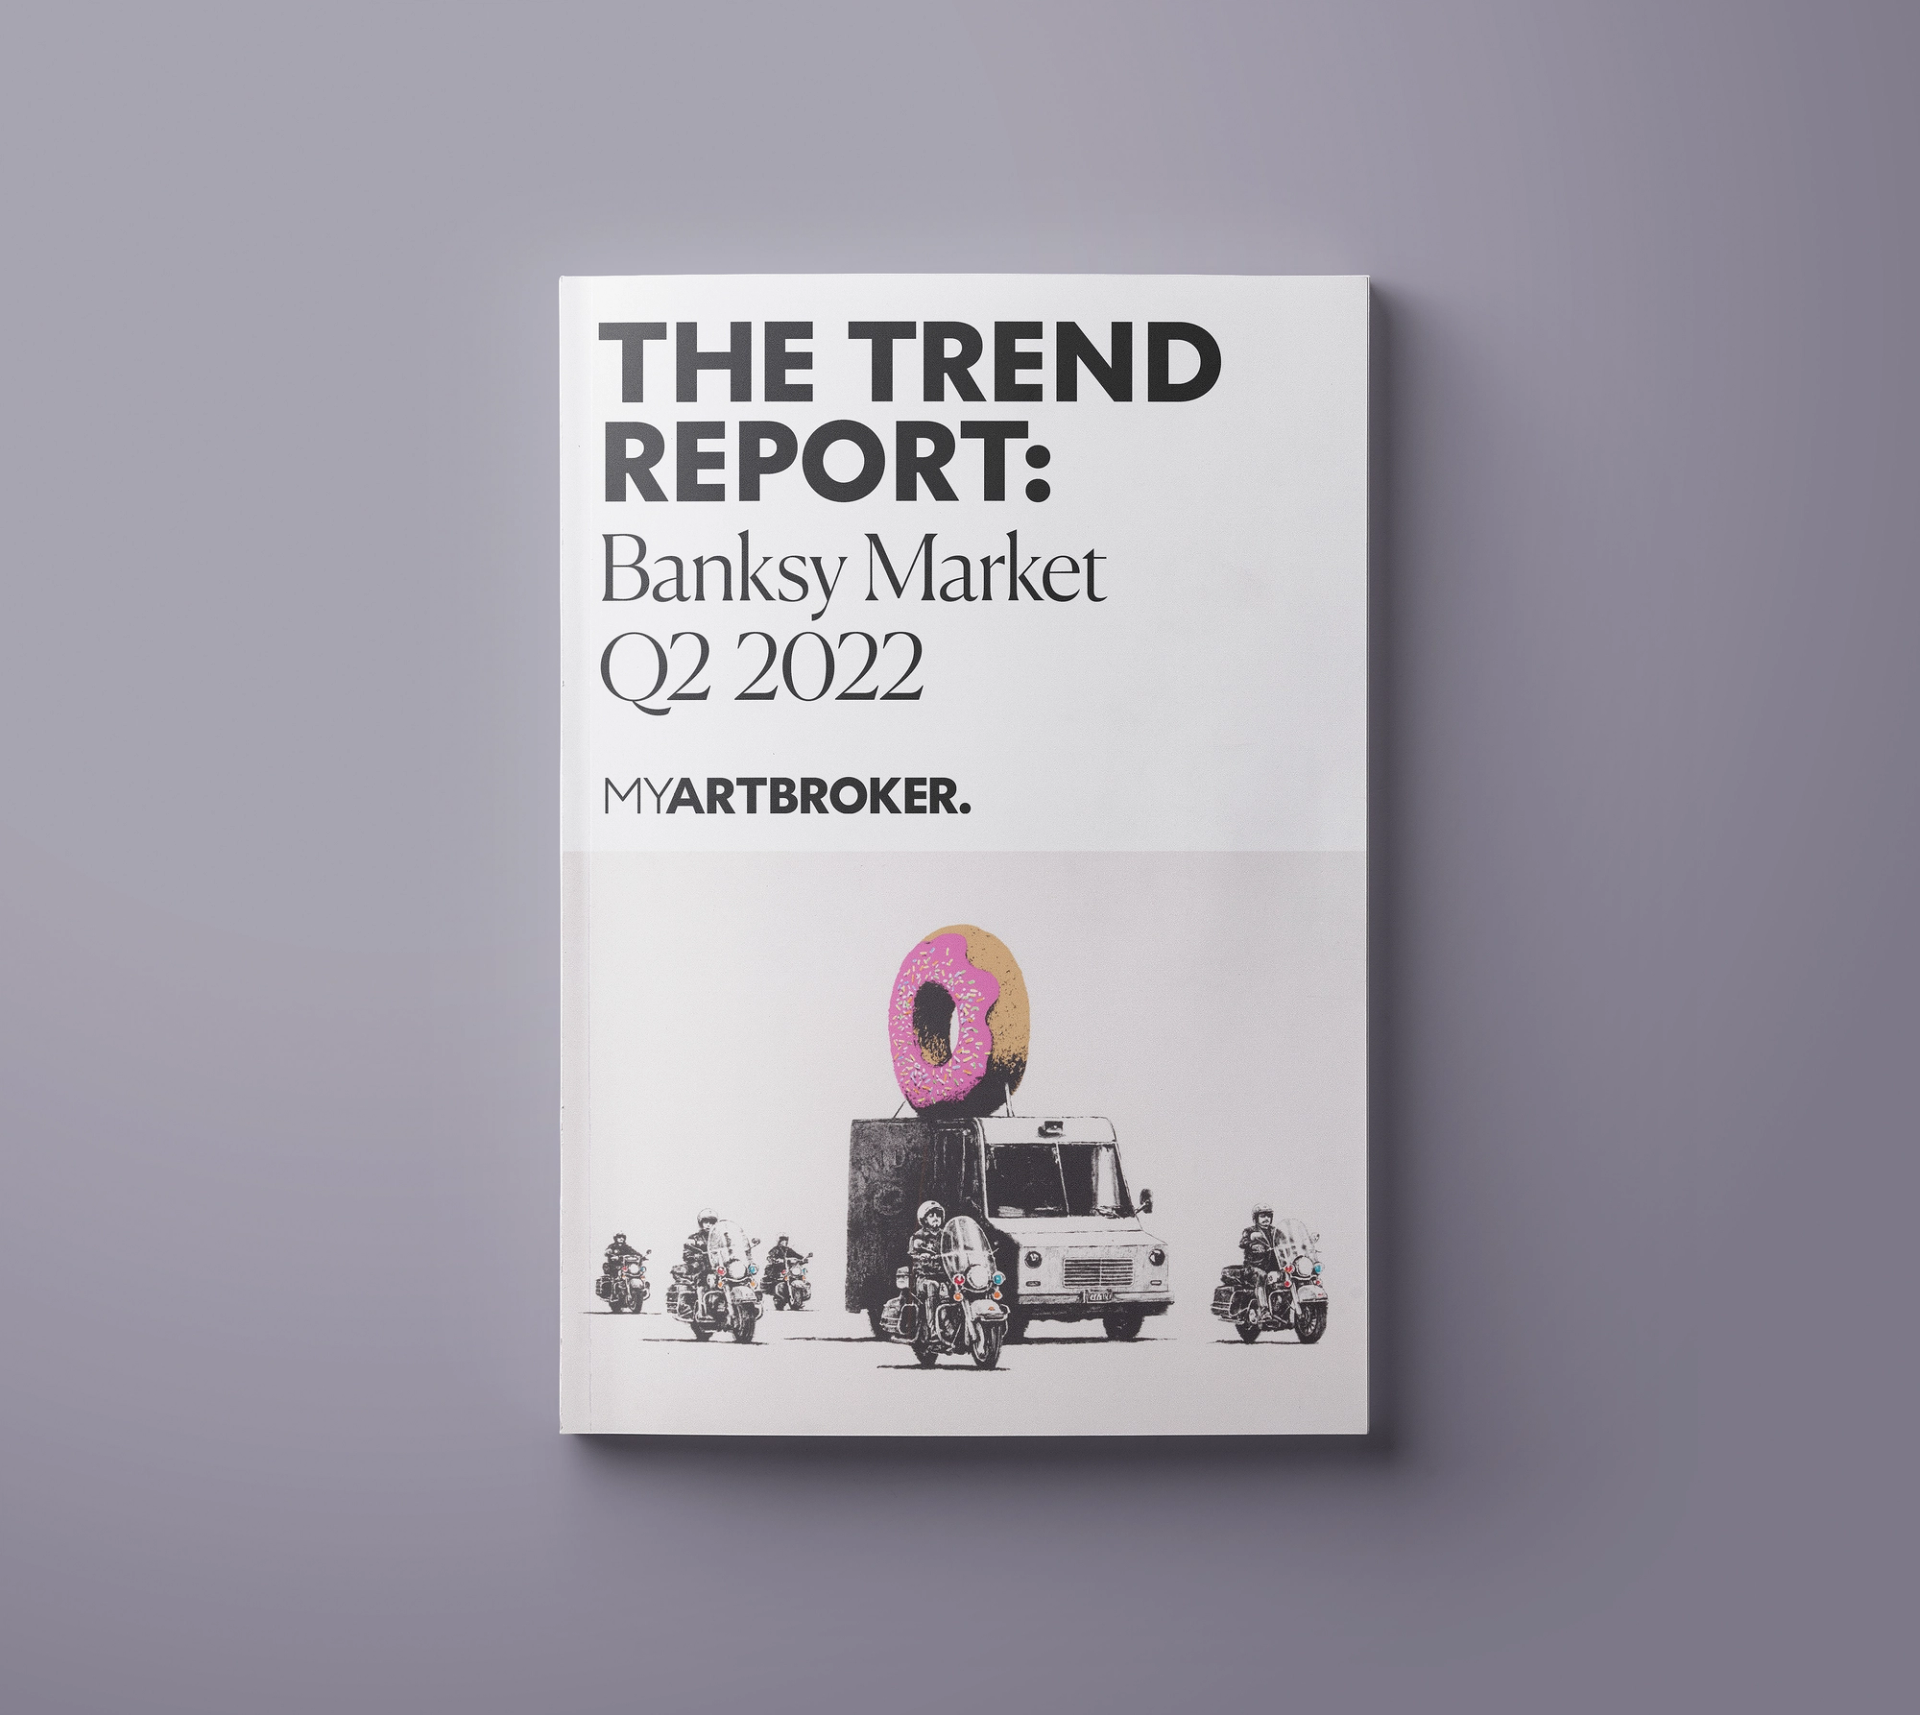 The Banksy Market Guide: Trend Report Q2 2022